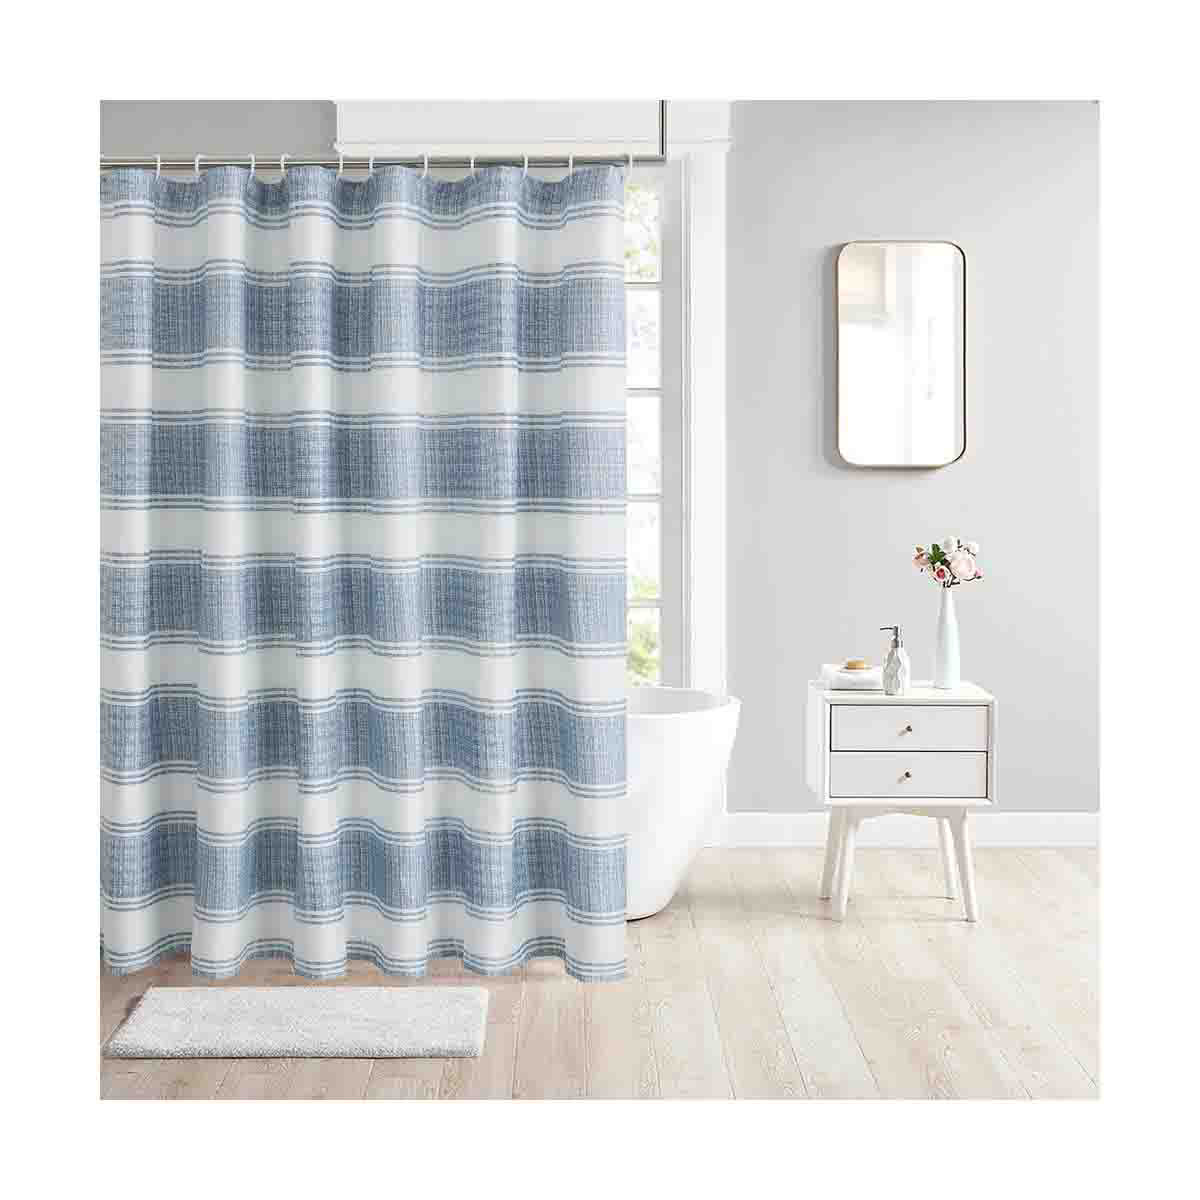 SPACERS CHOICE Shower Curtain for Sale by angerstone